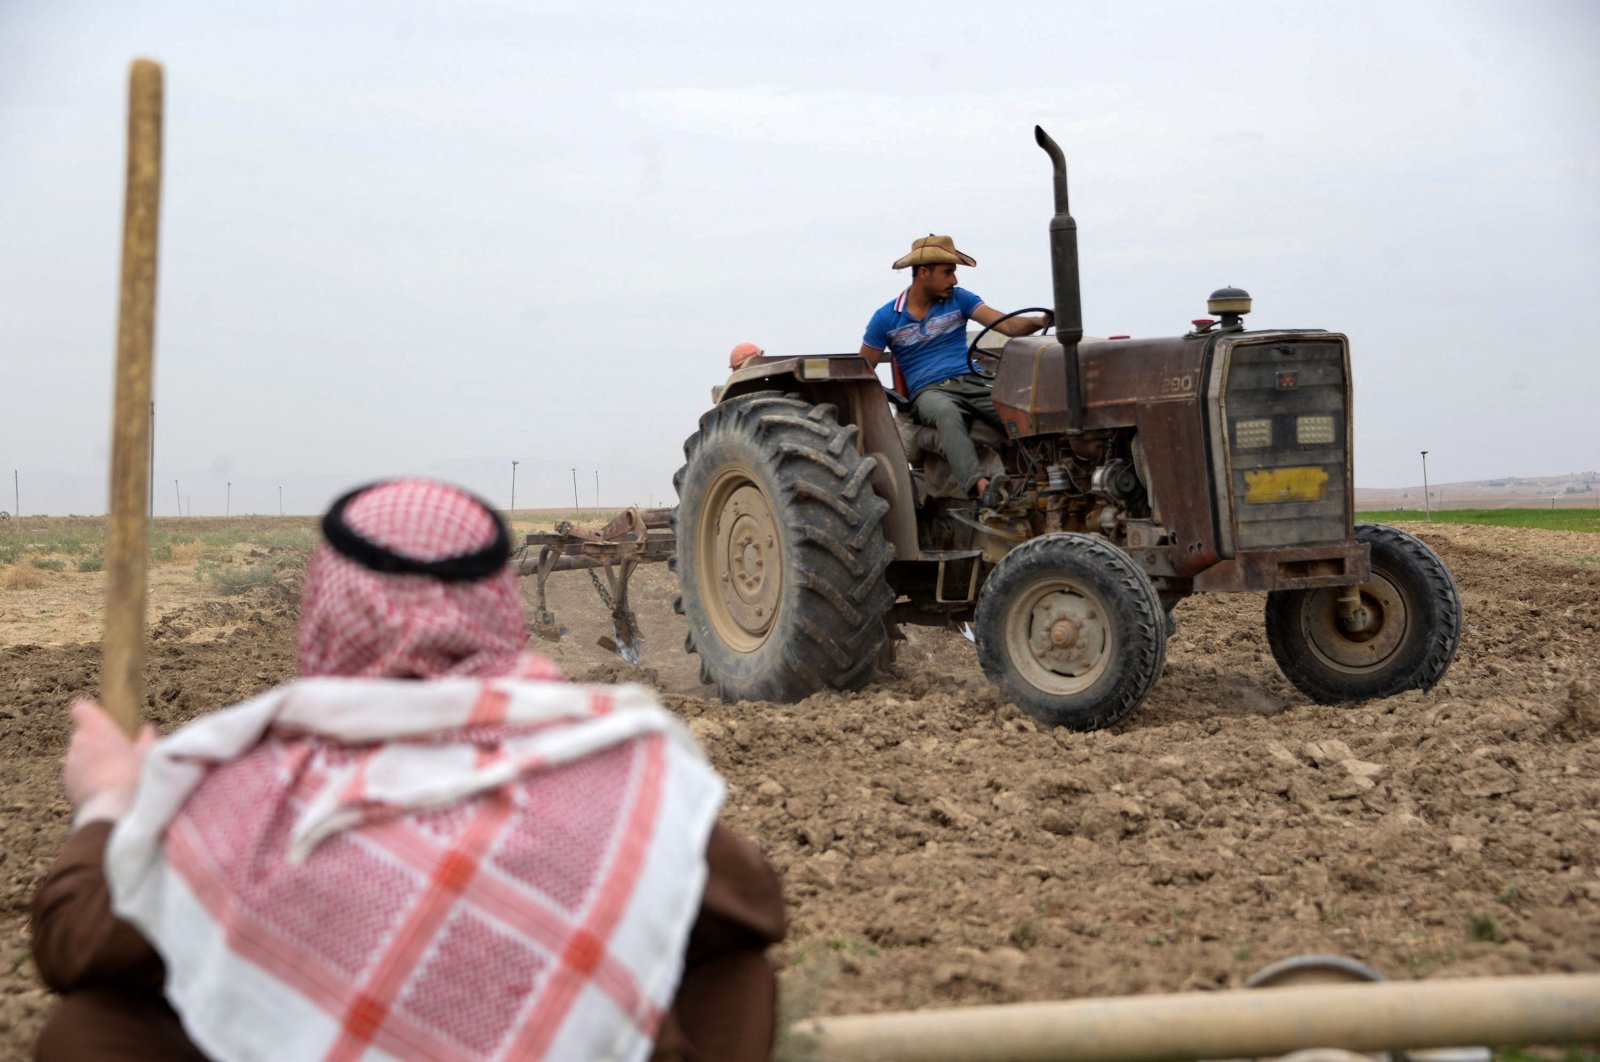 An elderly man watches a farmer plow the land with the help of a tractor, on the outskirts of the town of Tel Keppe (Tel Kaif) north of the city of Mosul in the northern province of Nineveh, Iraq, Oct. 26, 2021. (AFP Photo)